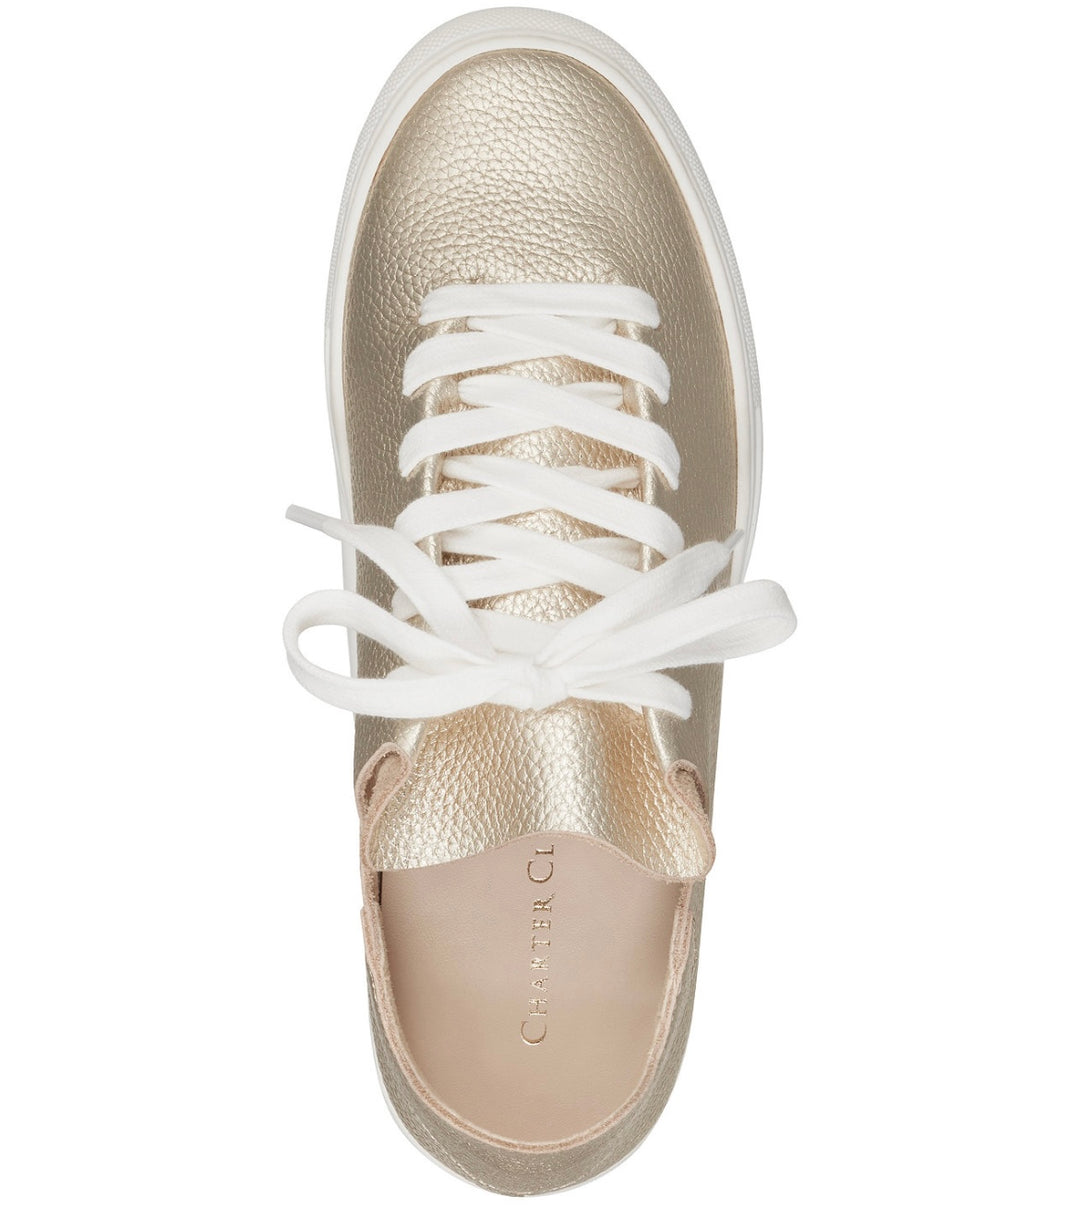 Charter Club Women's Padmaa Lace-Up Sneakers Shoes Gold Leather Size 6M